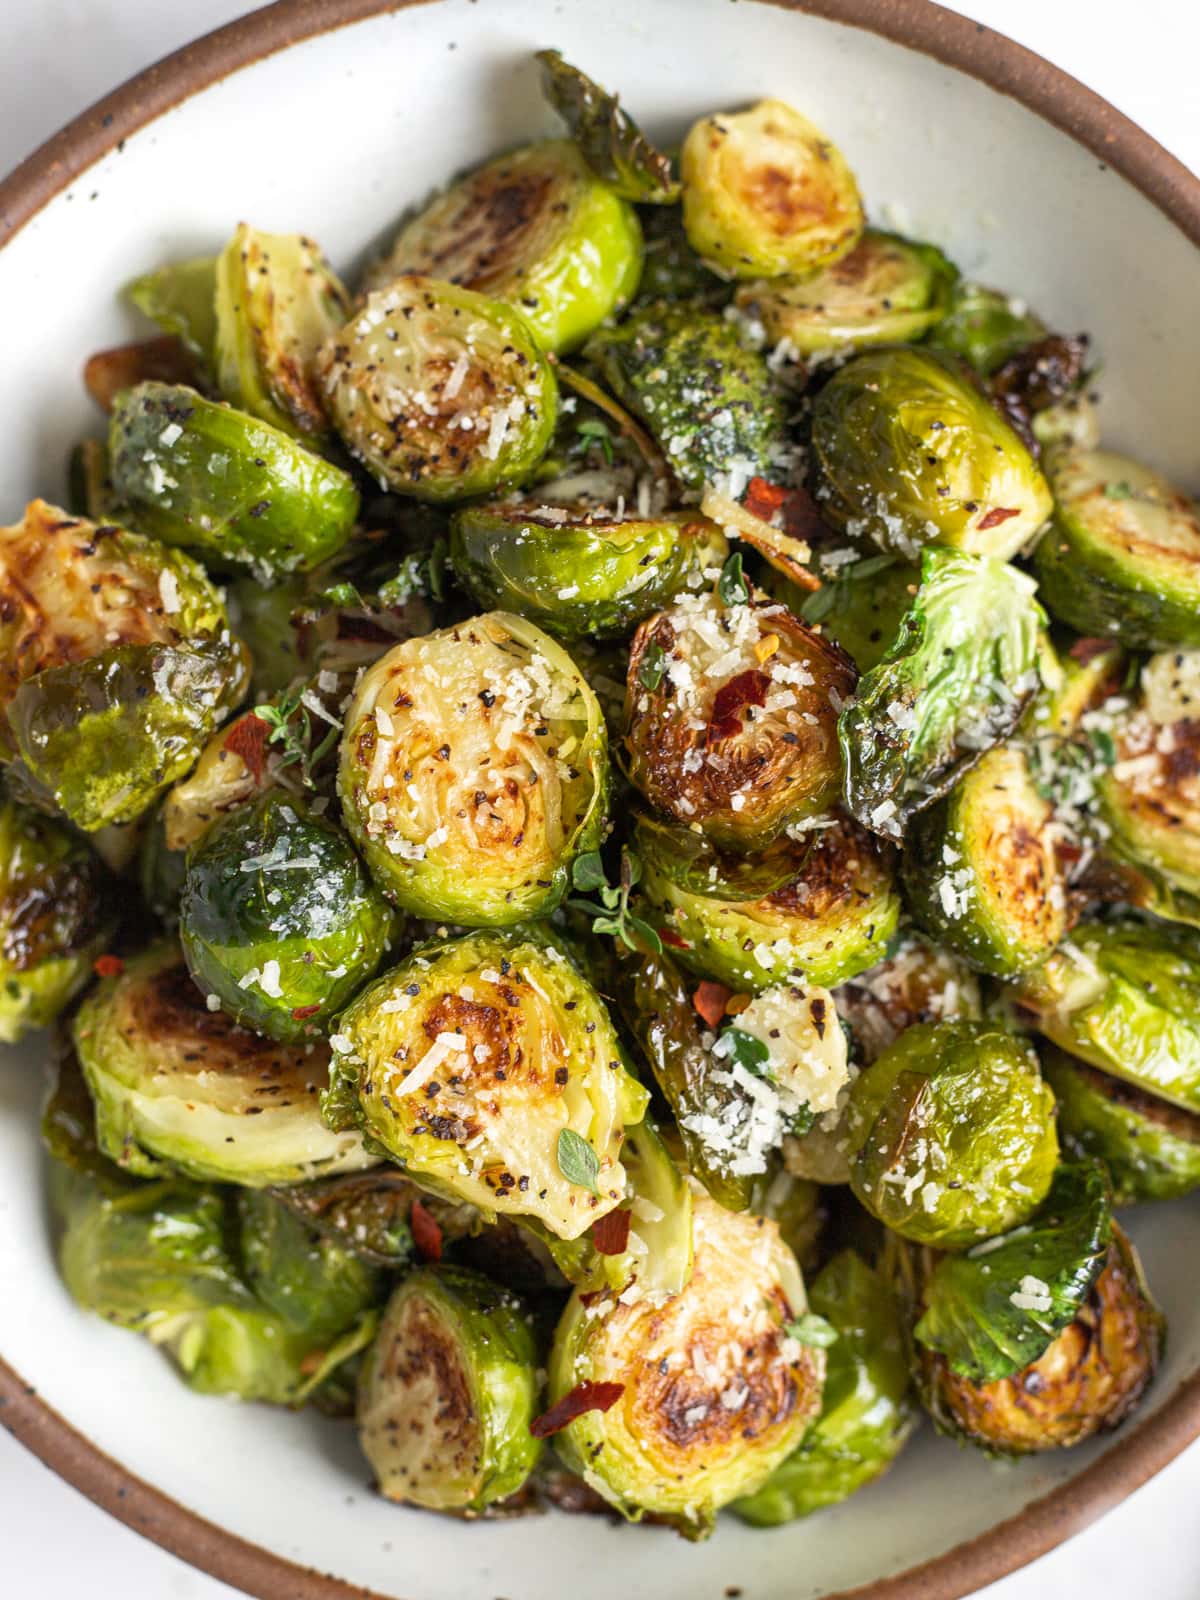 Bowlful of roasted brussels sprouts.